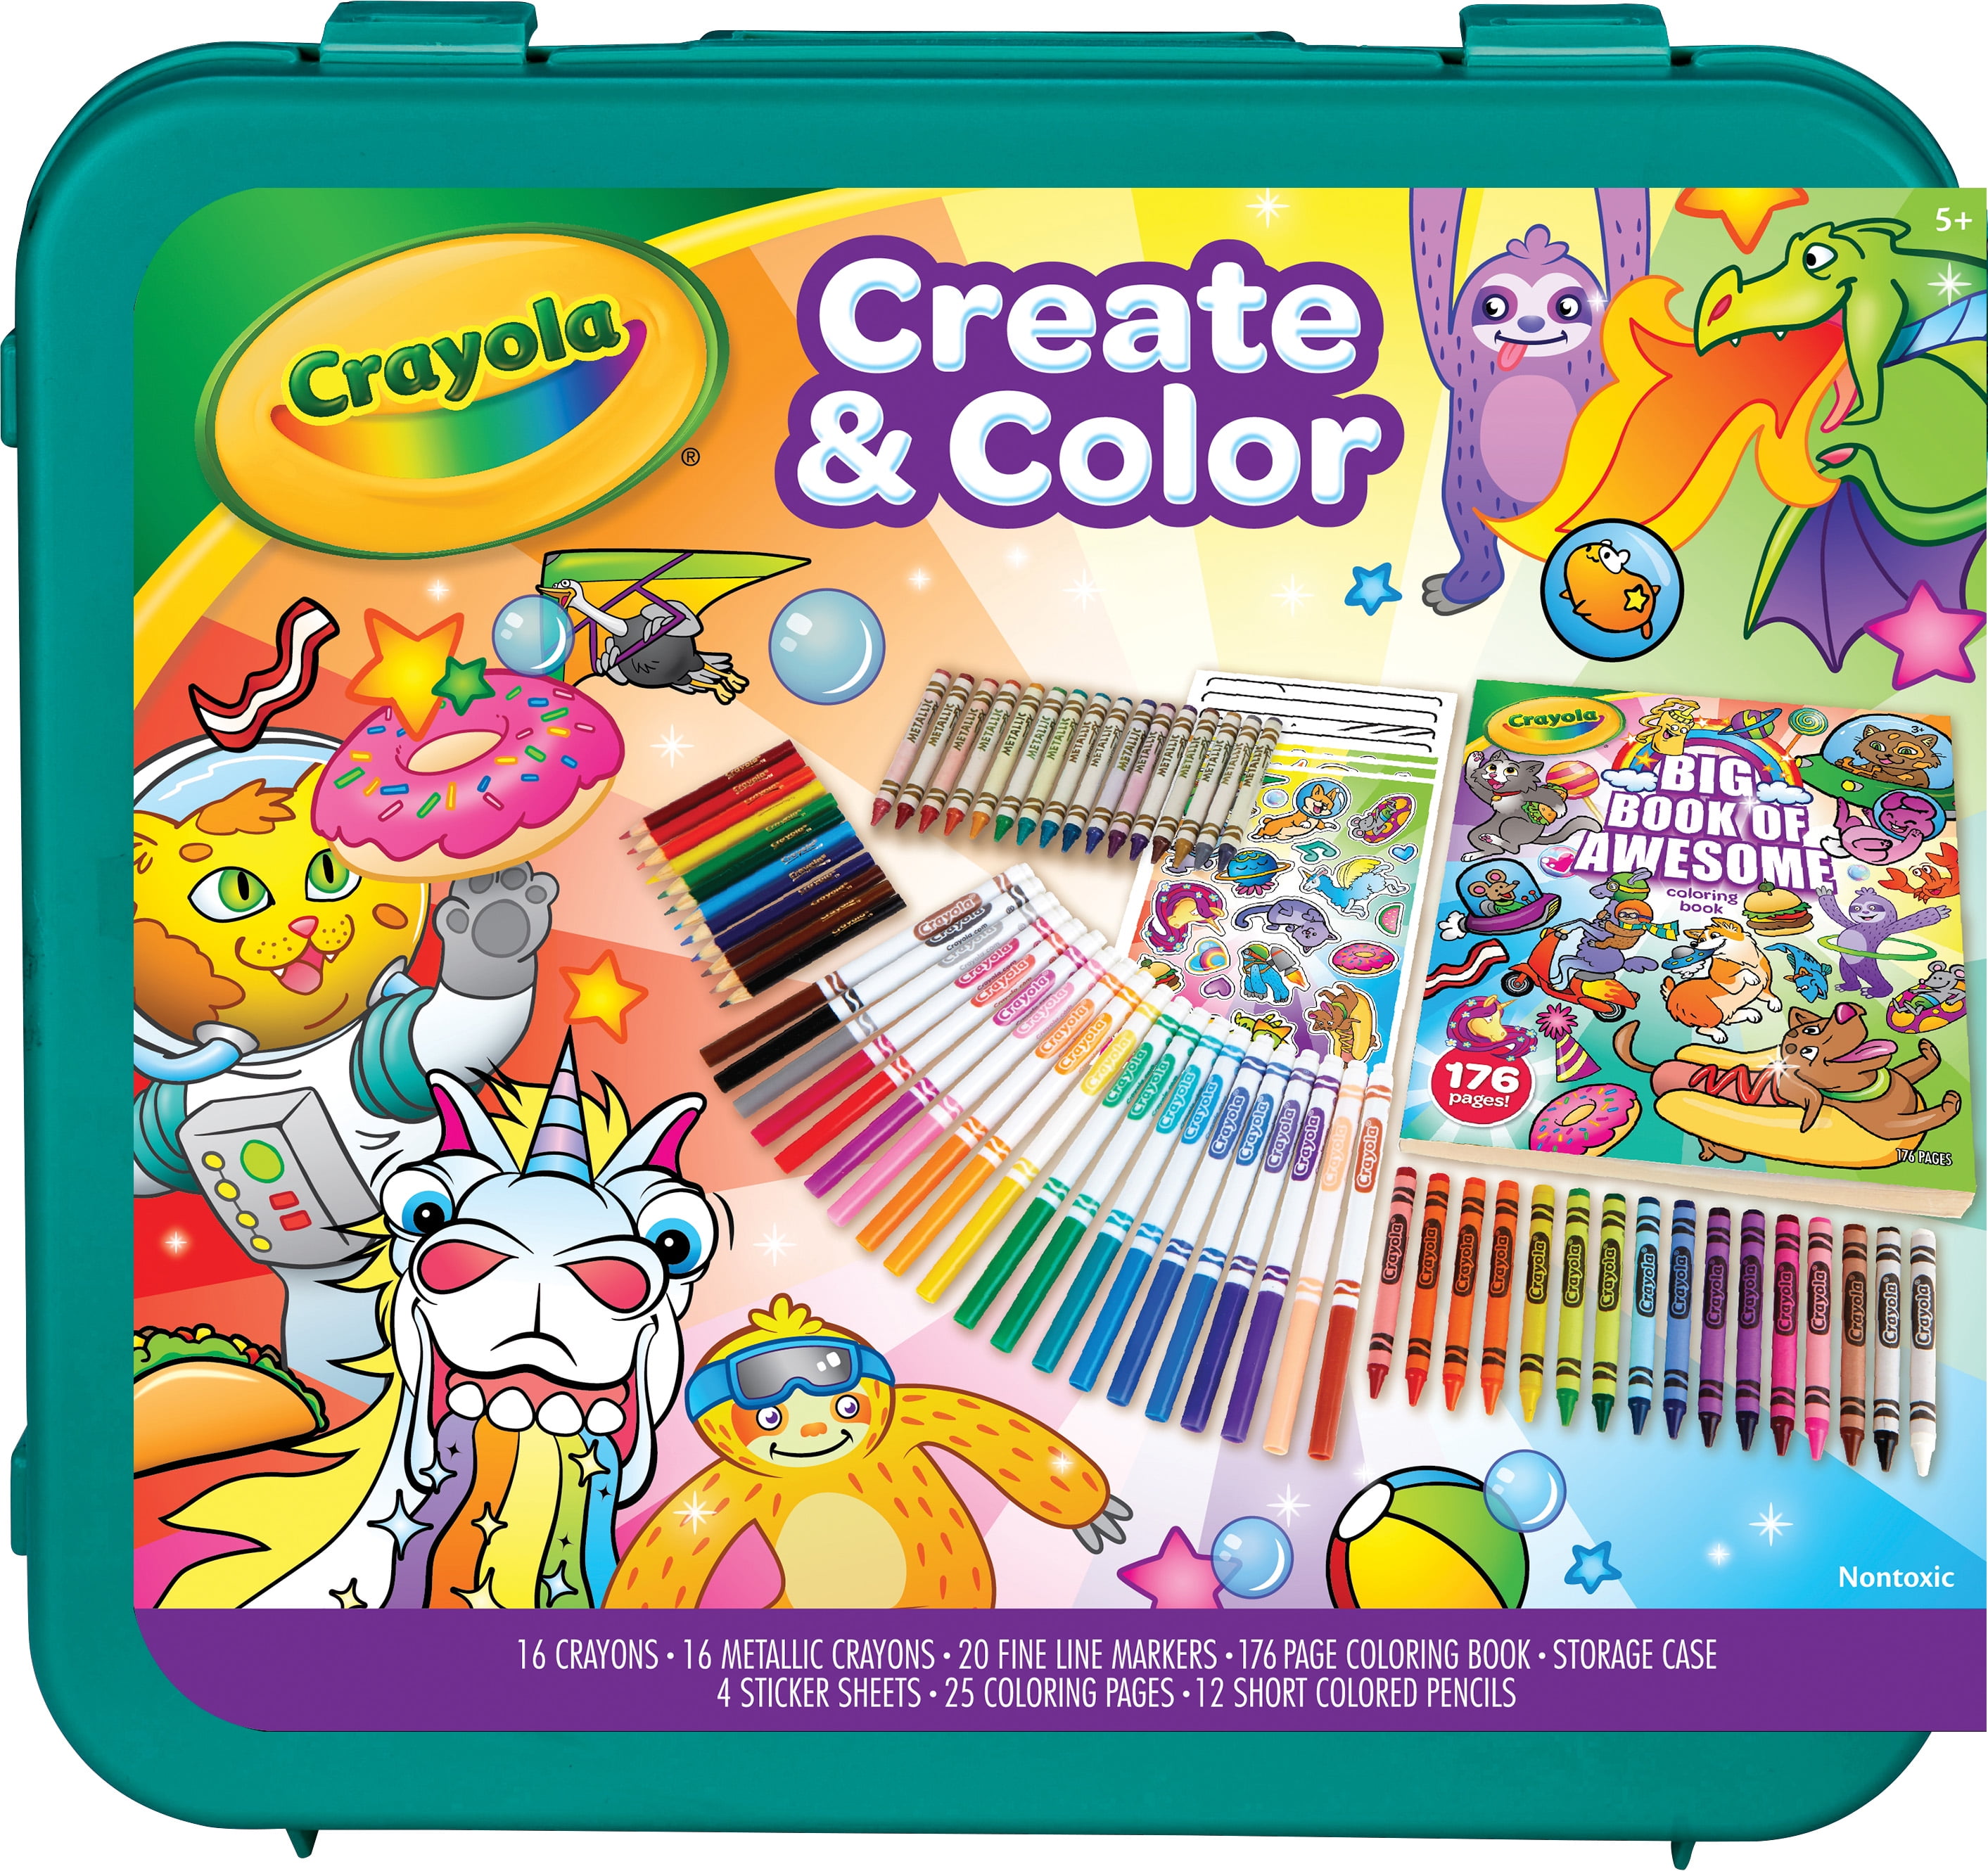 Crayola Coloring Book, Epic Book of Awesome